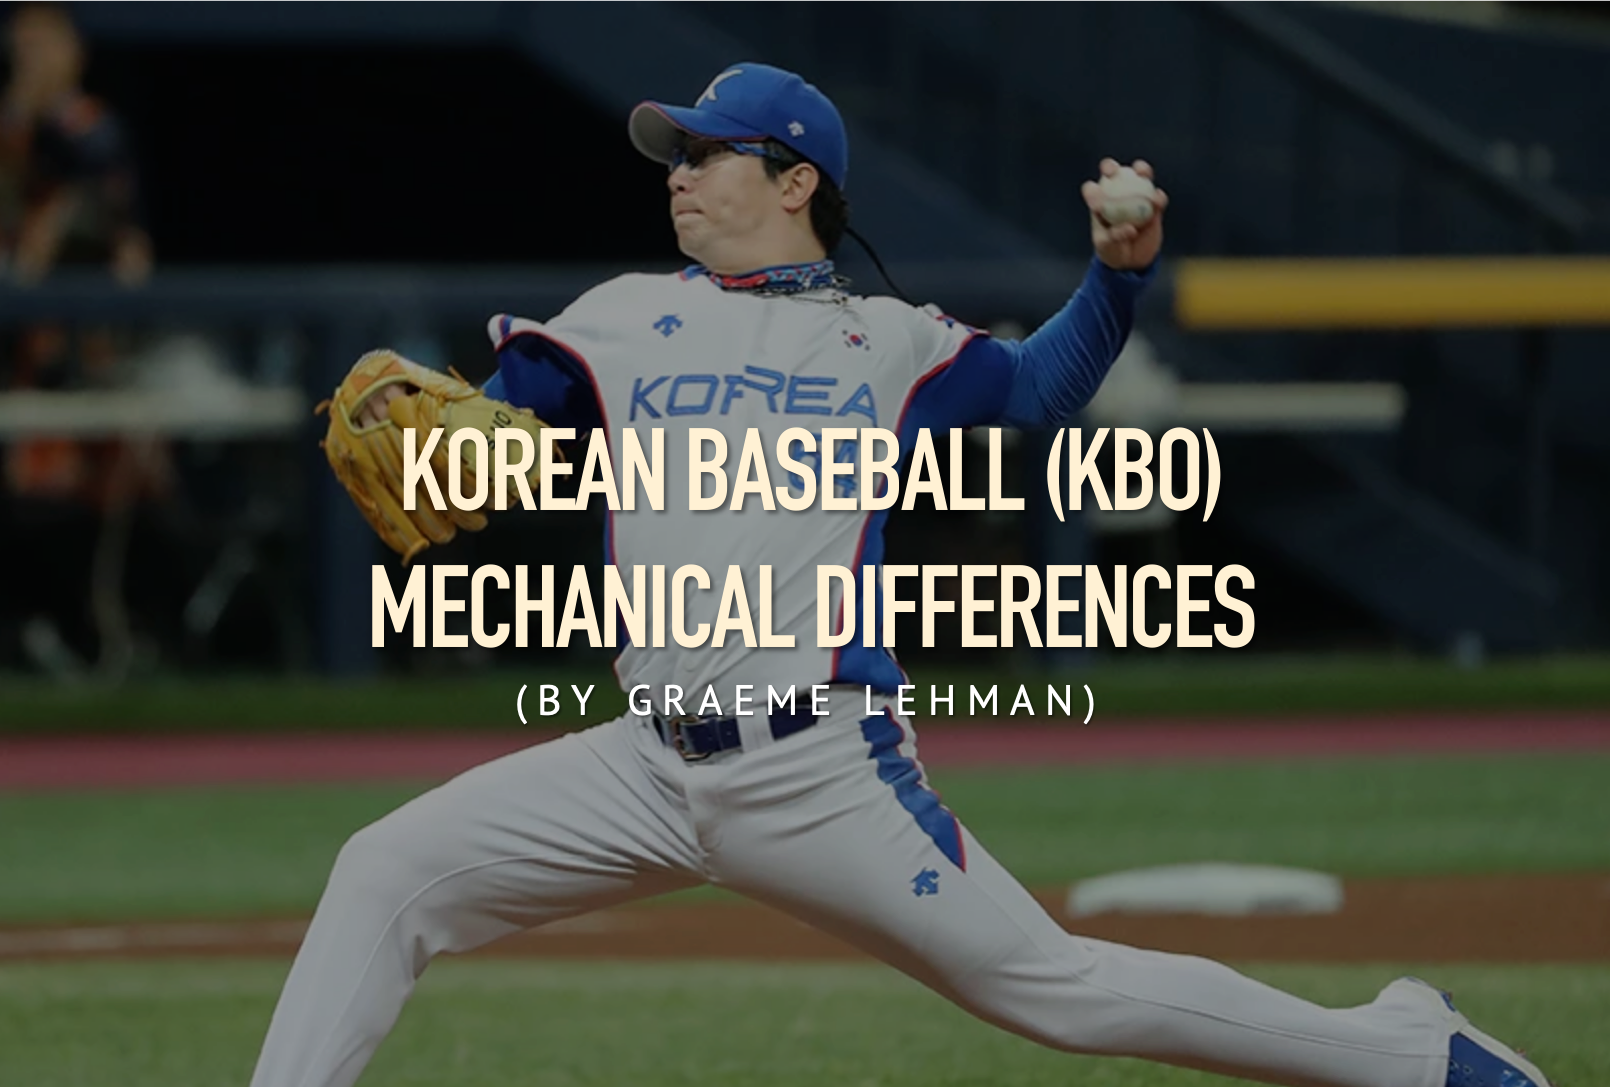 US vs. Korean Baseball - Are There Mechanical Differences?